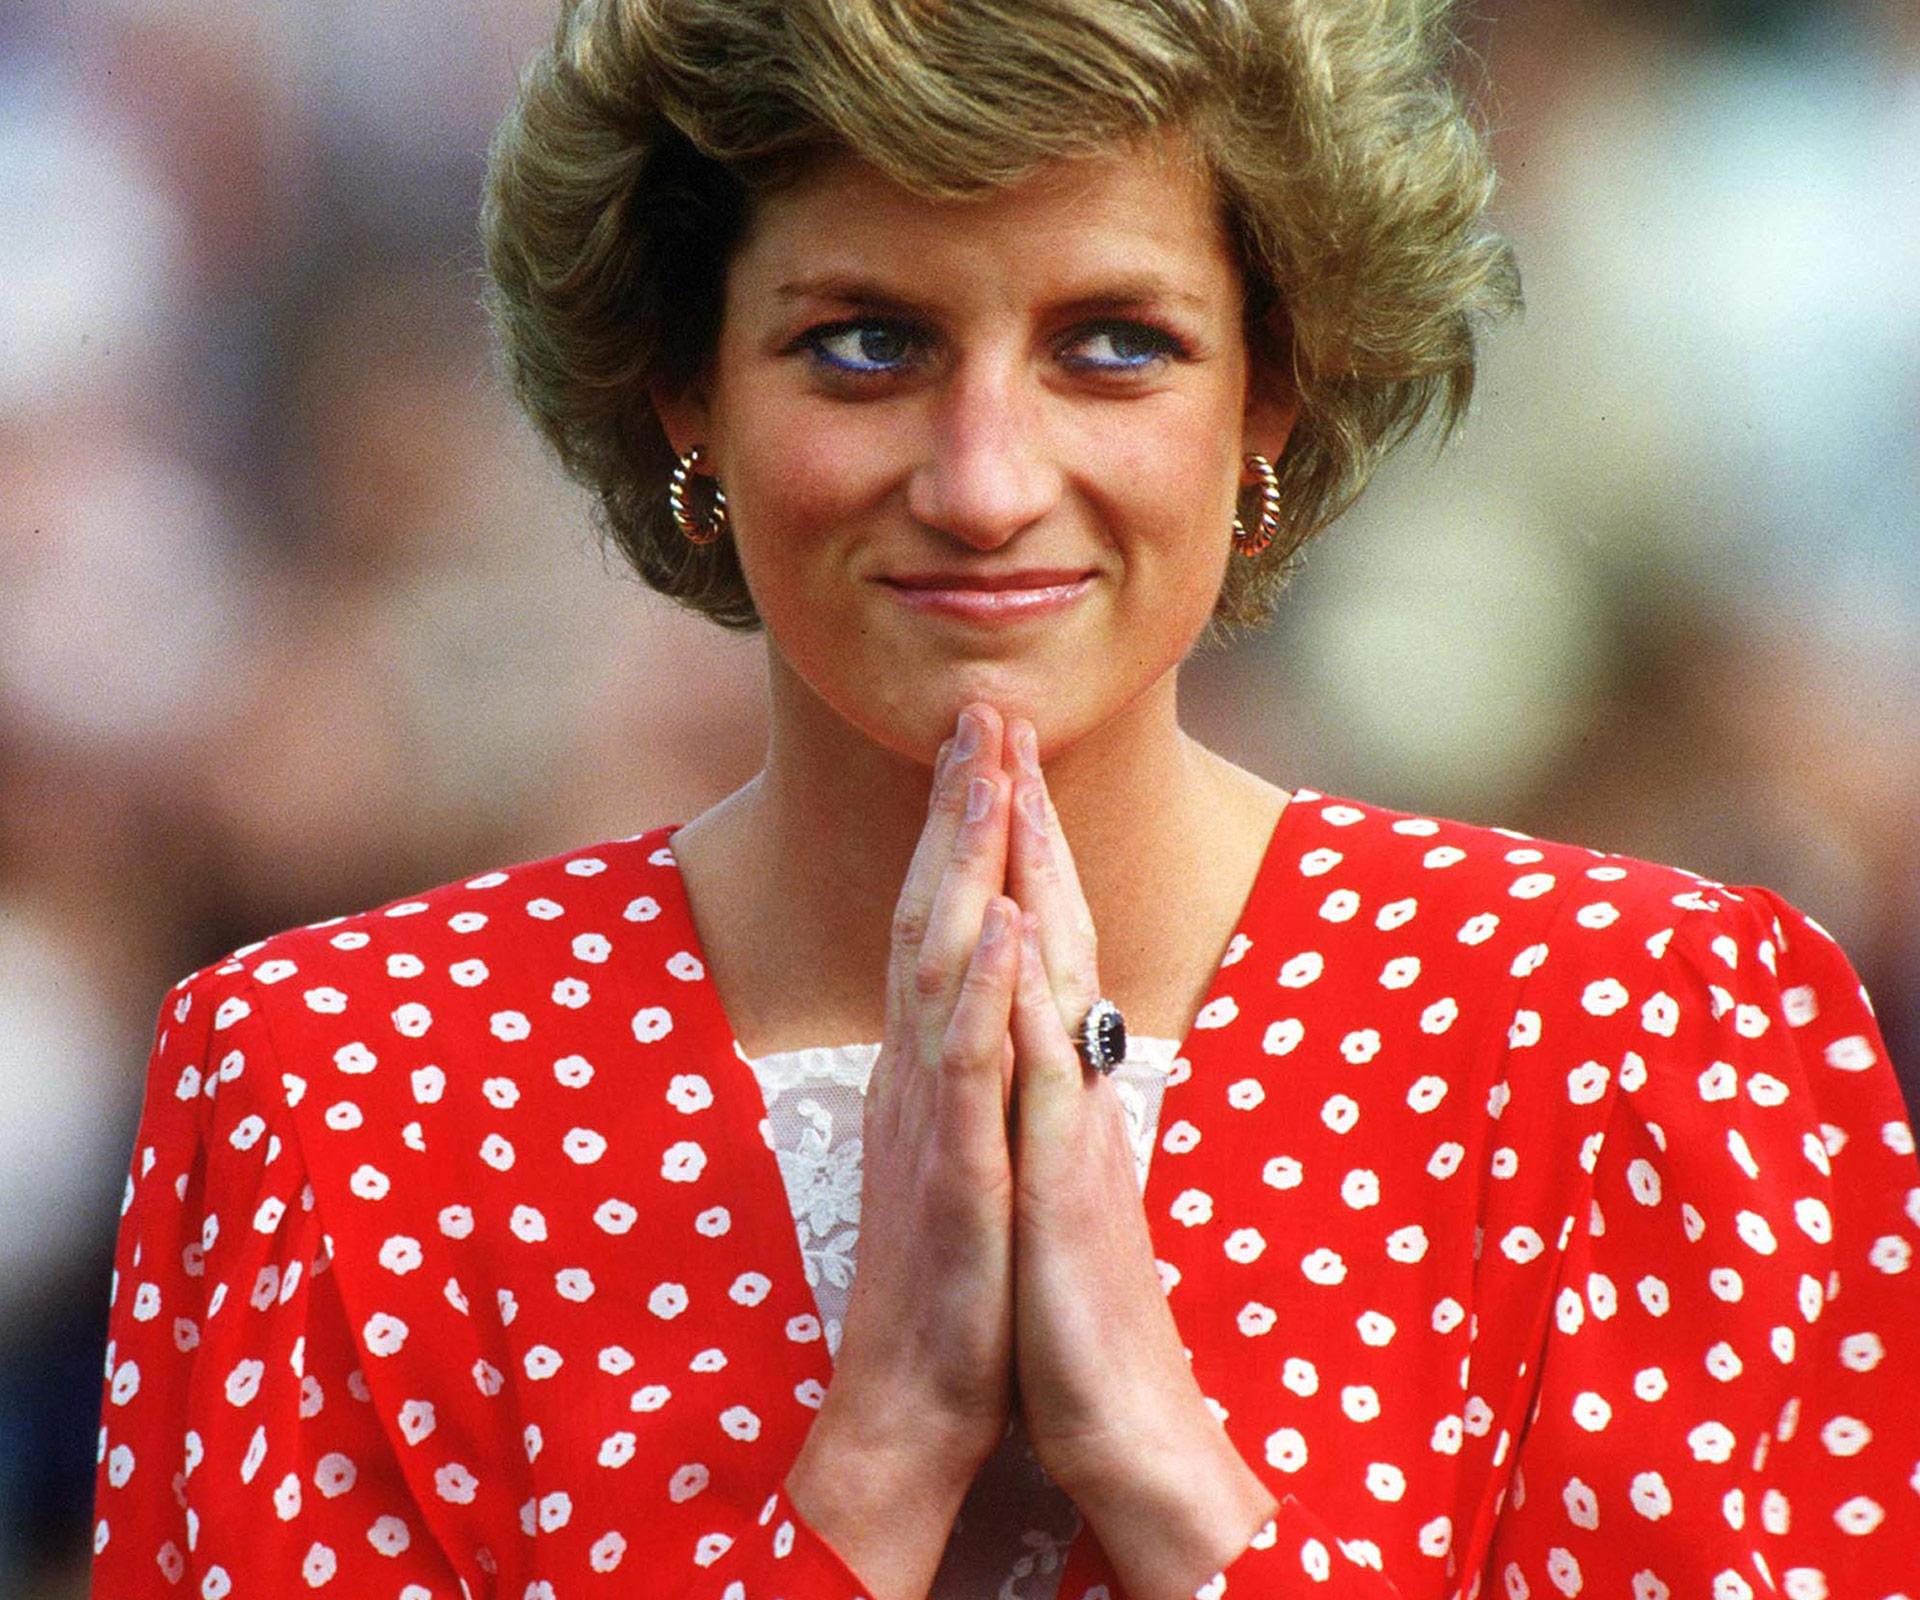 Princess Diana to be honoured in the kindest possible way